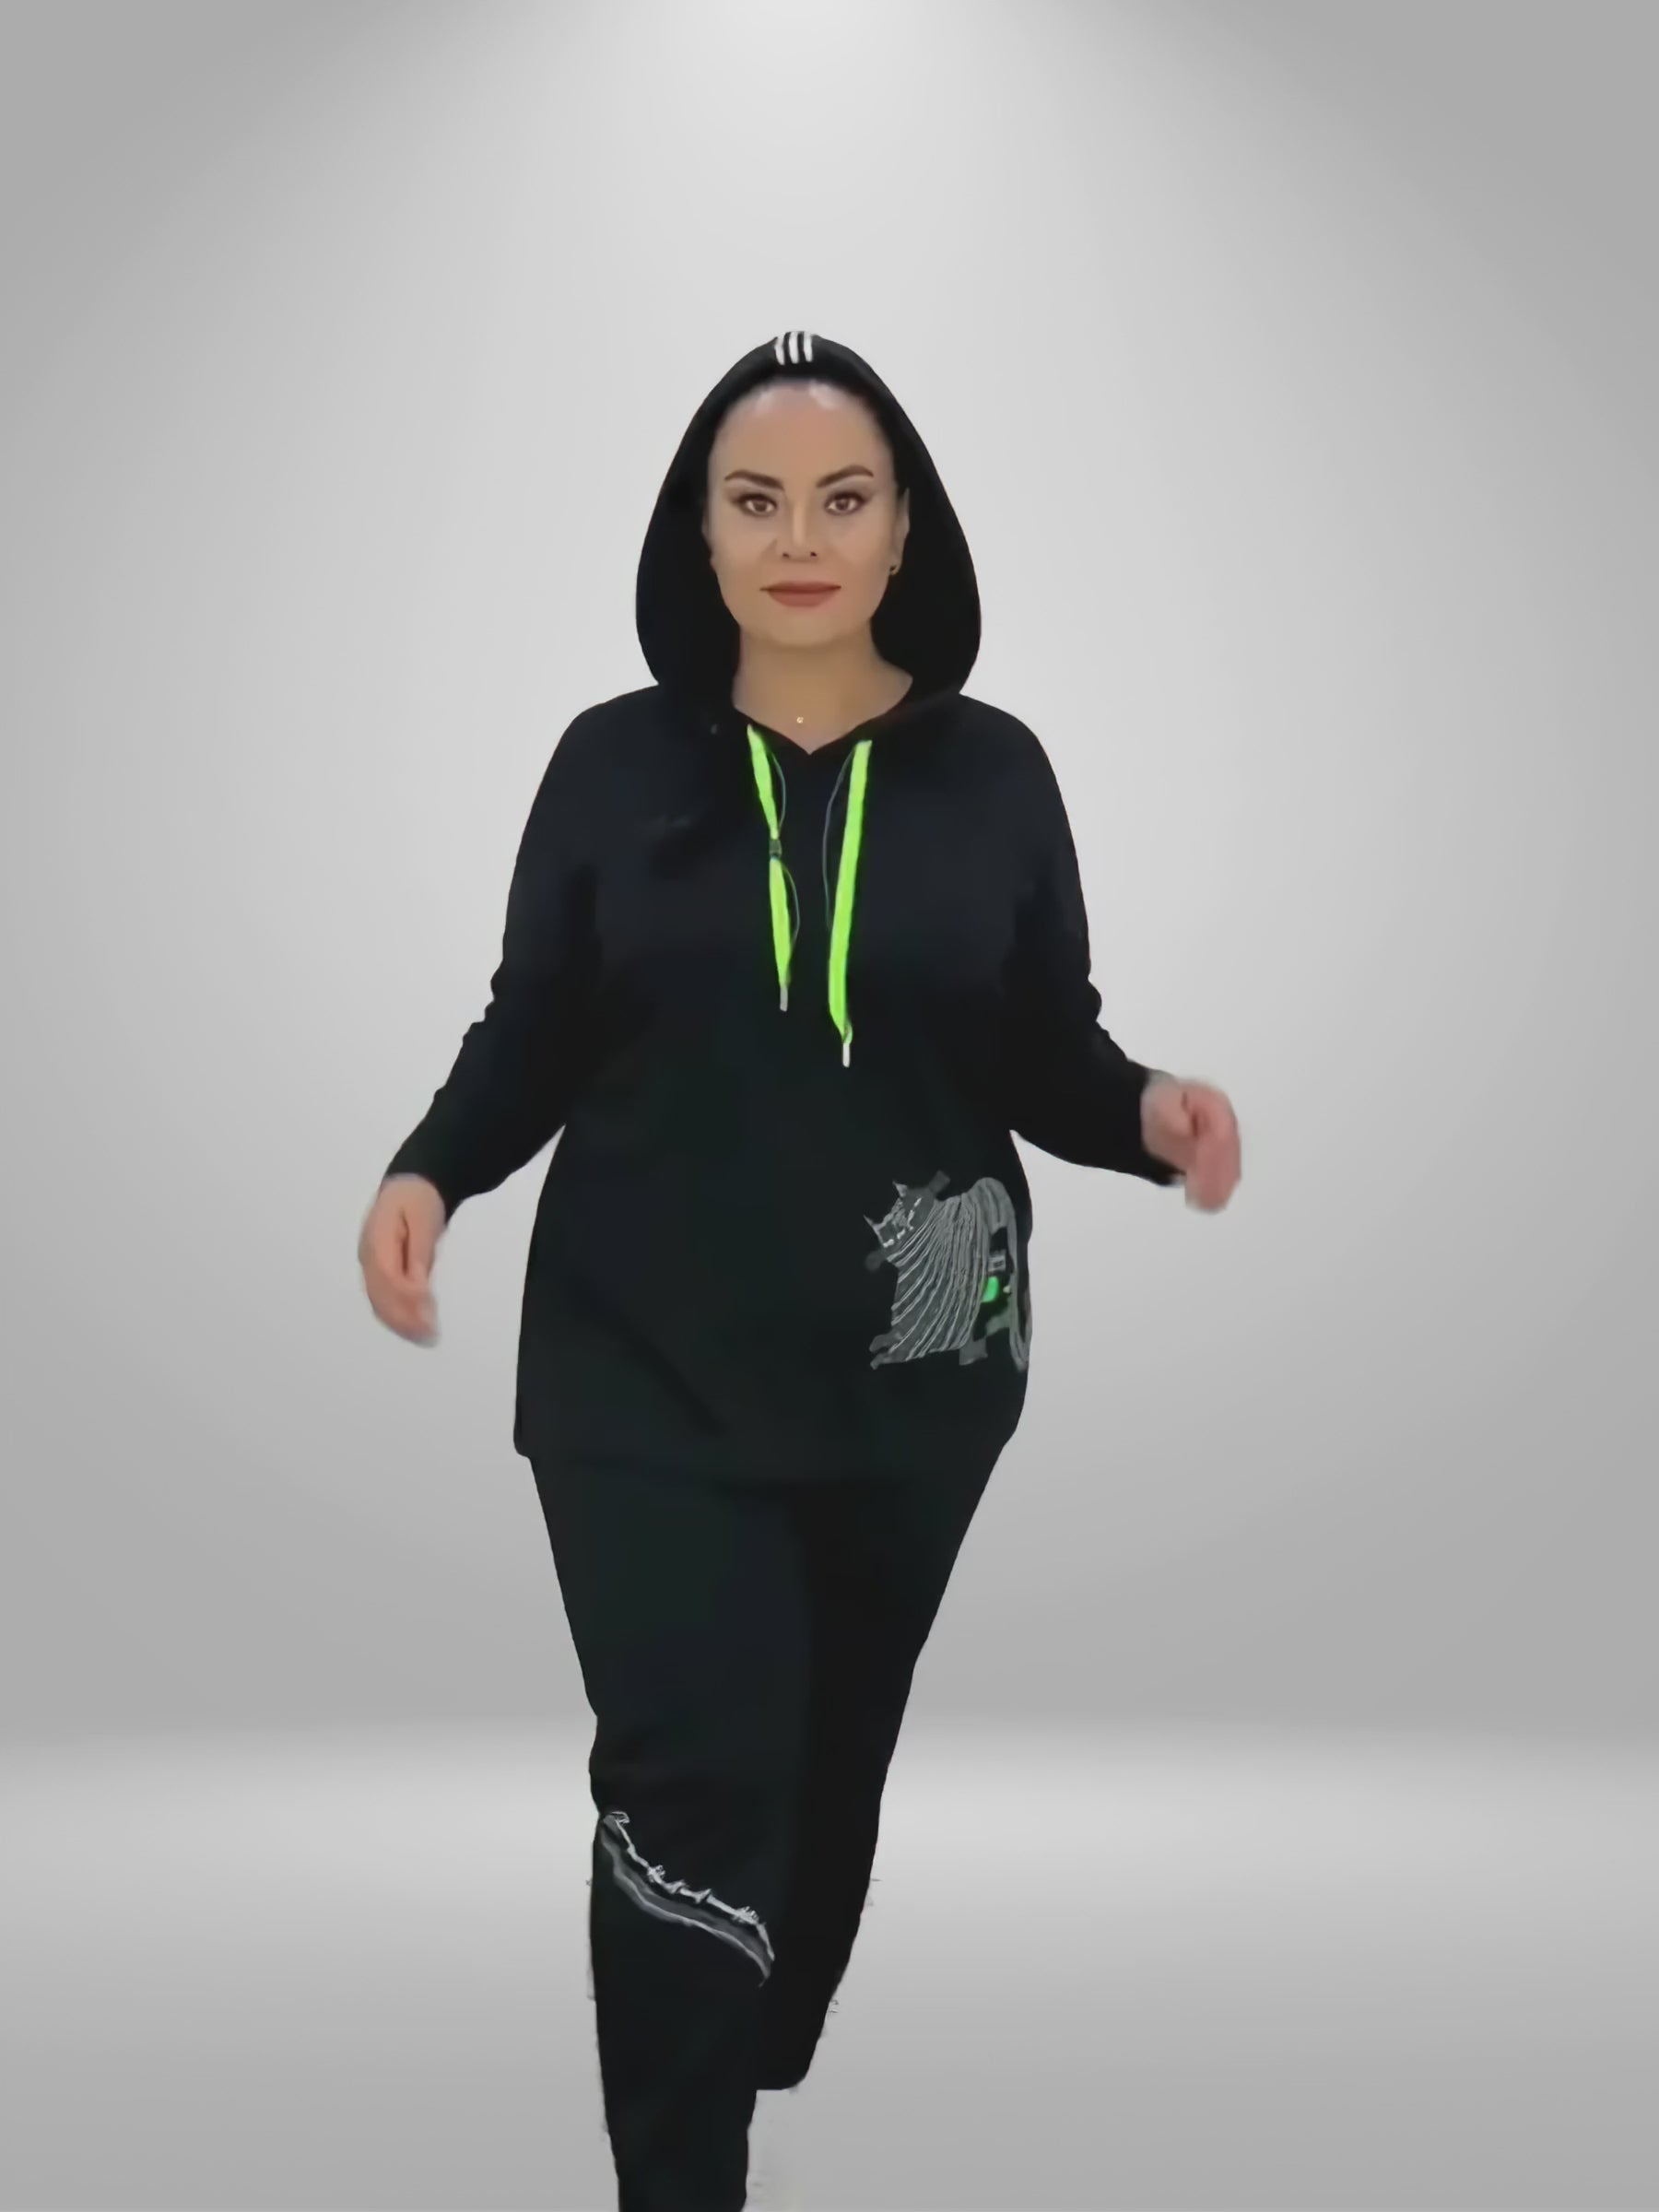 Video demonstration of the Darkwin Cheshire Cat Women's Hoodie & Pants Set. The video highlights a model wearing the set in sizes 16-20, emphasizing the softness of the viscose-polyester blend and the unique Cheshire Cat design.